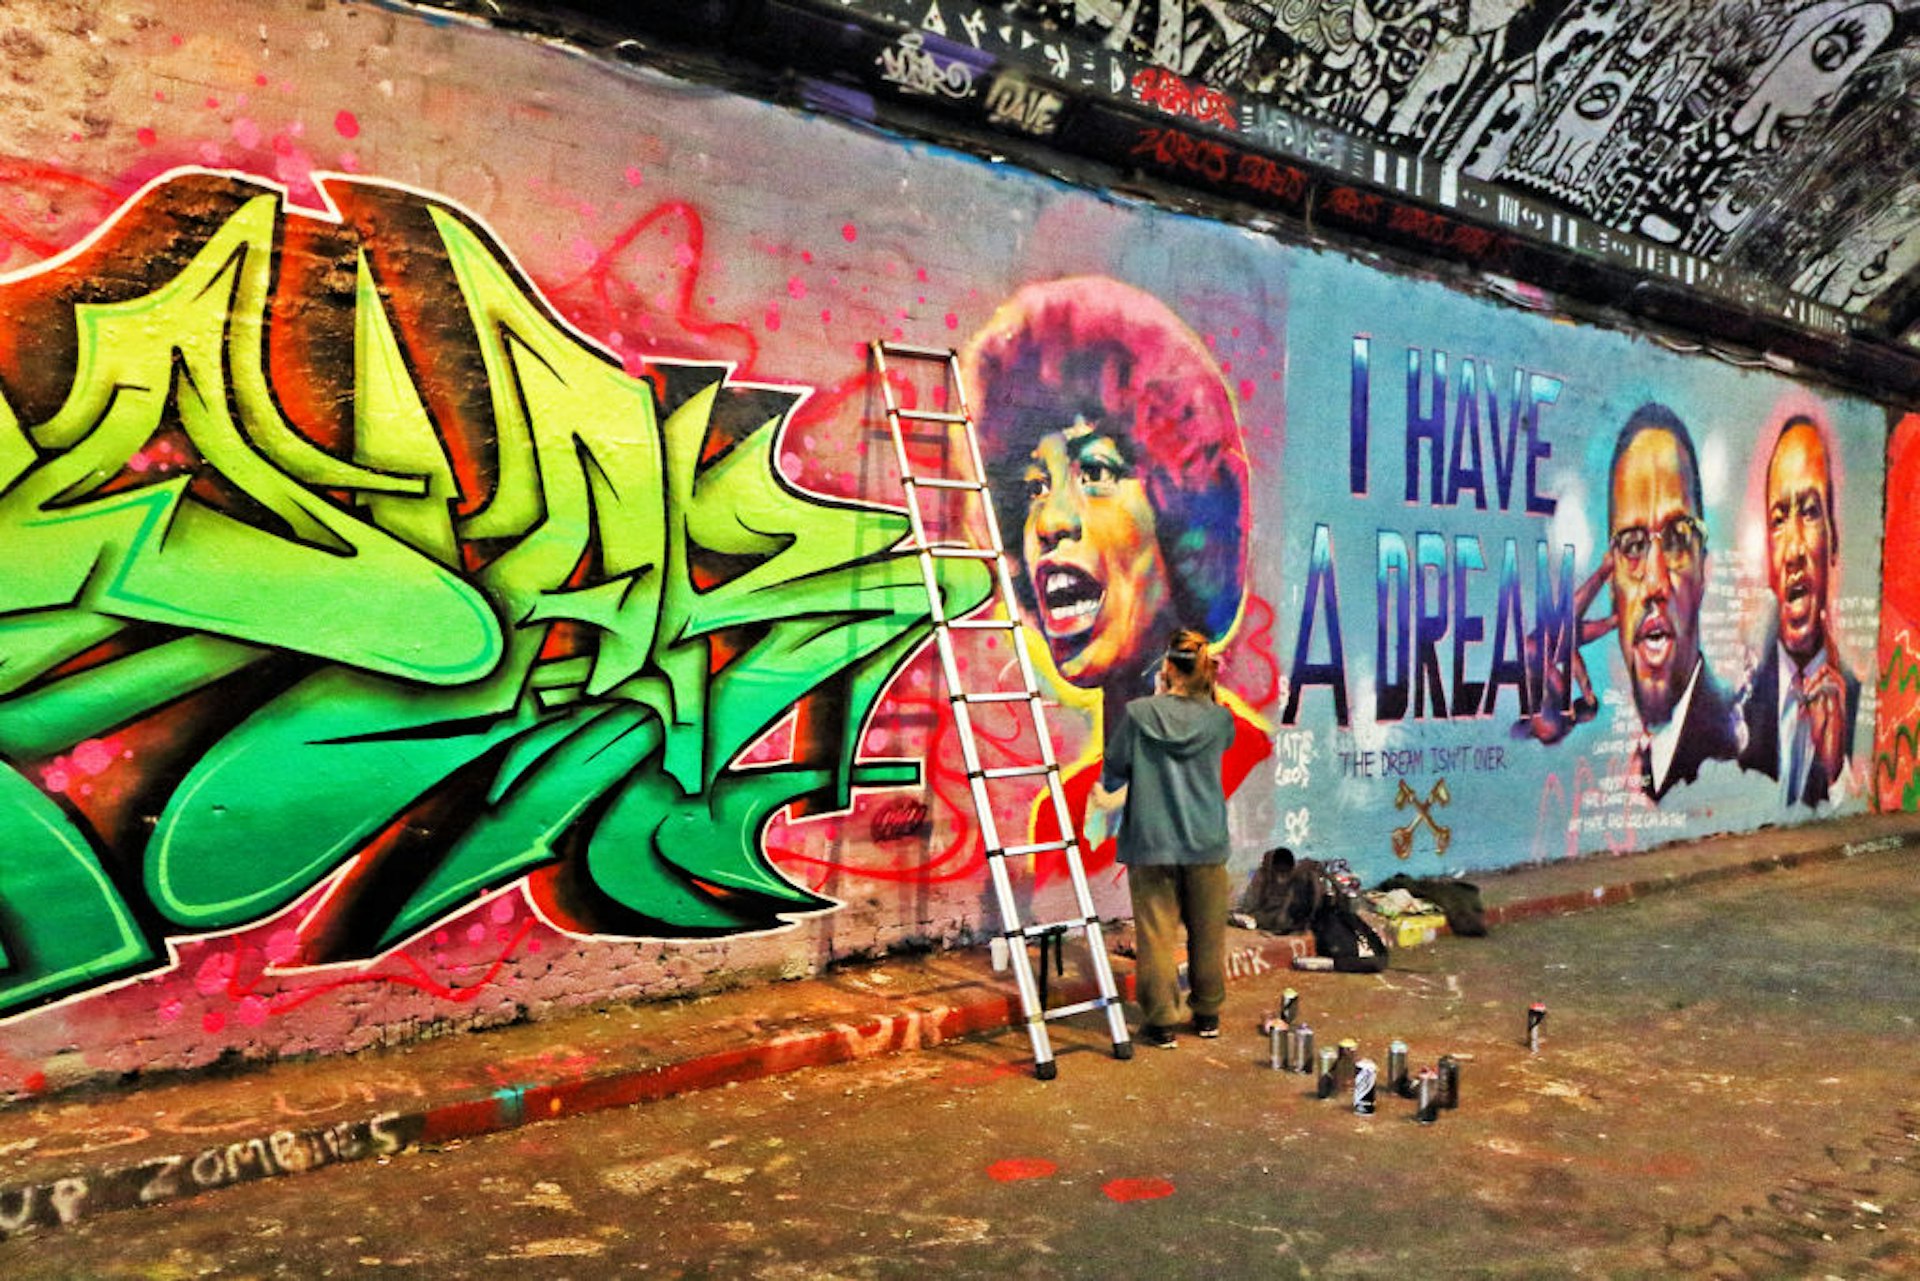  WOM's Collective street artist works on another wall featuring a black woman..Black Lives Matter related Street Art at the famous Leake Street Tunnel under Waterloo station.